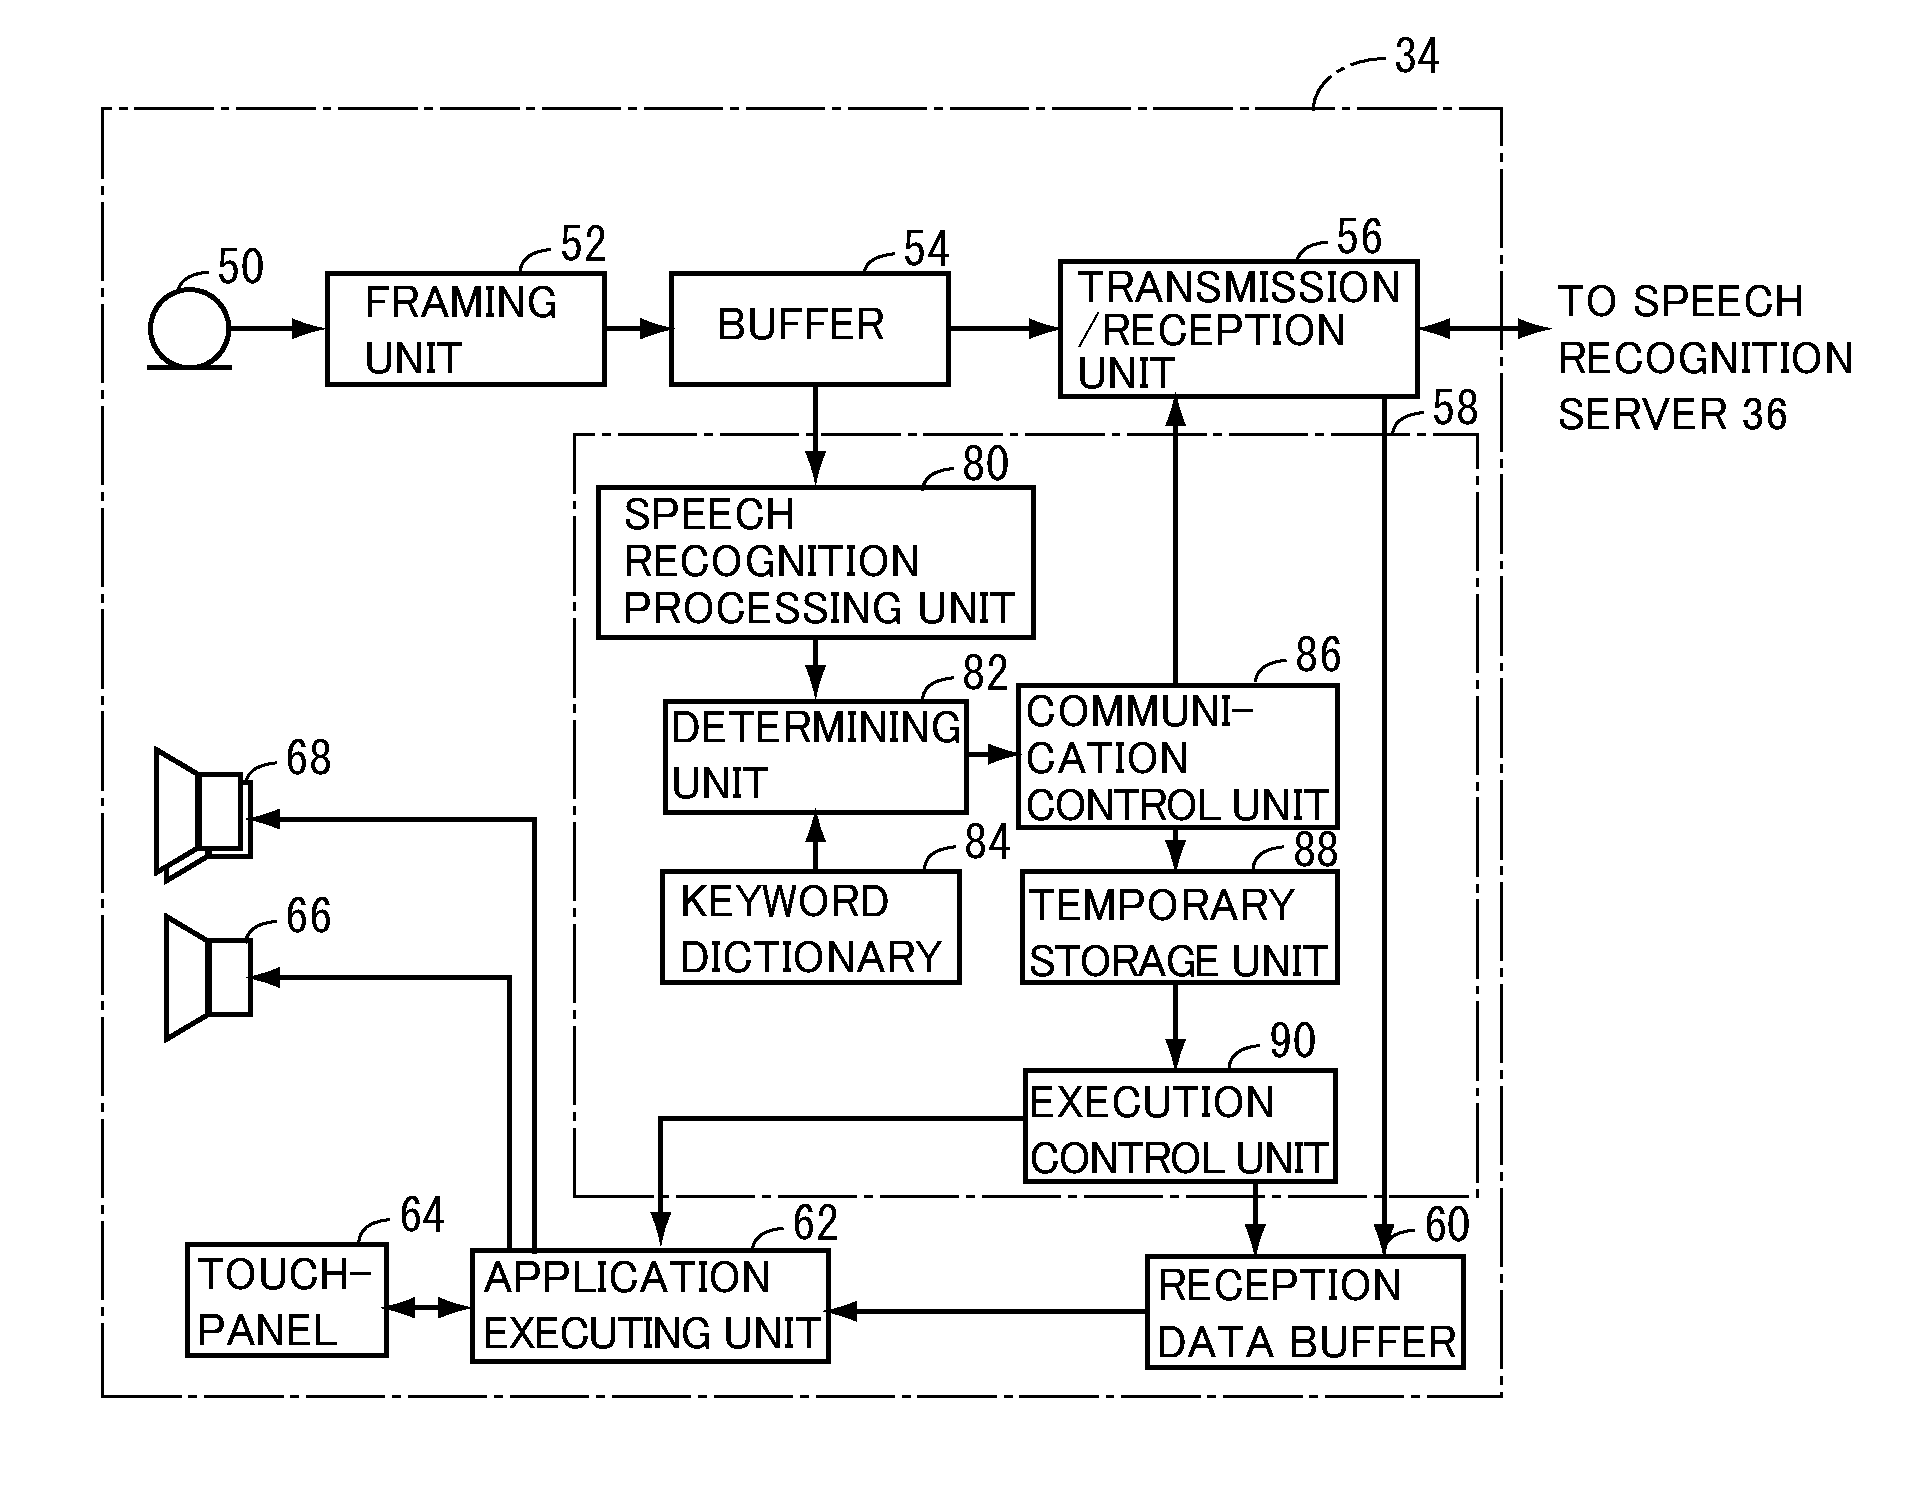 Speech recognition client apparatus performing local speech recognition